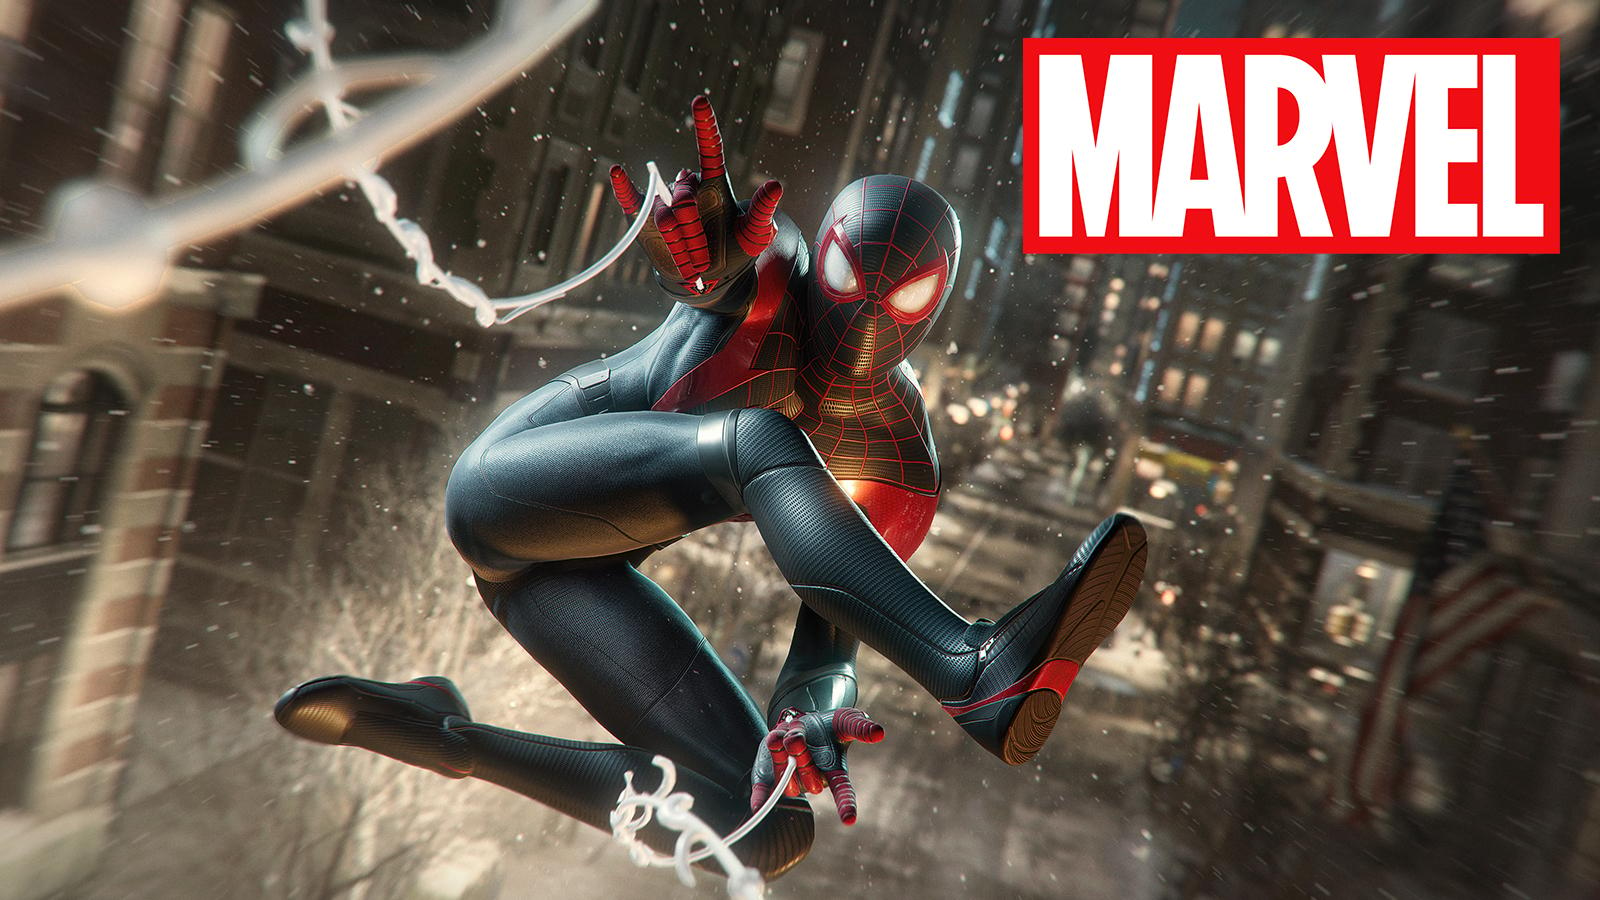 Miles Morales officially Insomniac's 'main' Spider-Man going forward